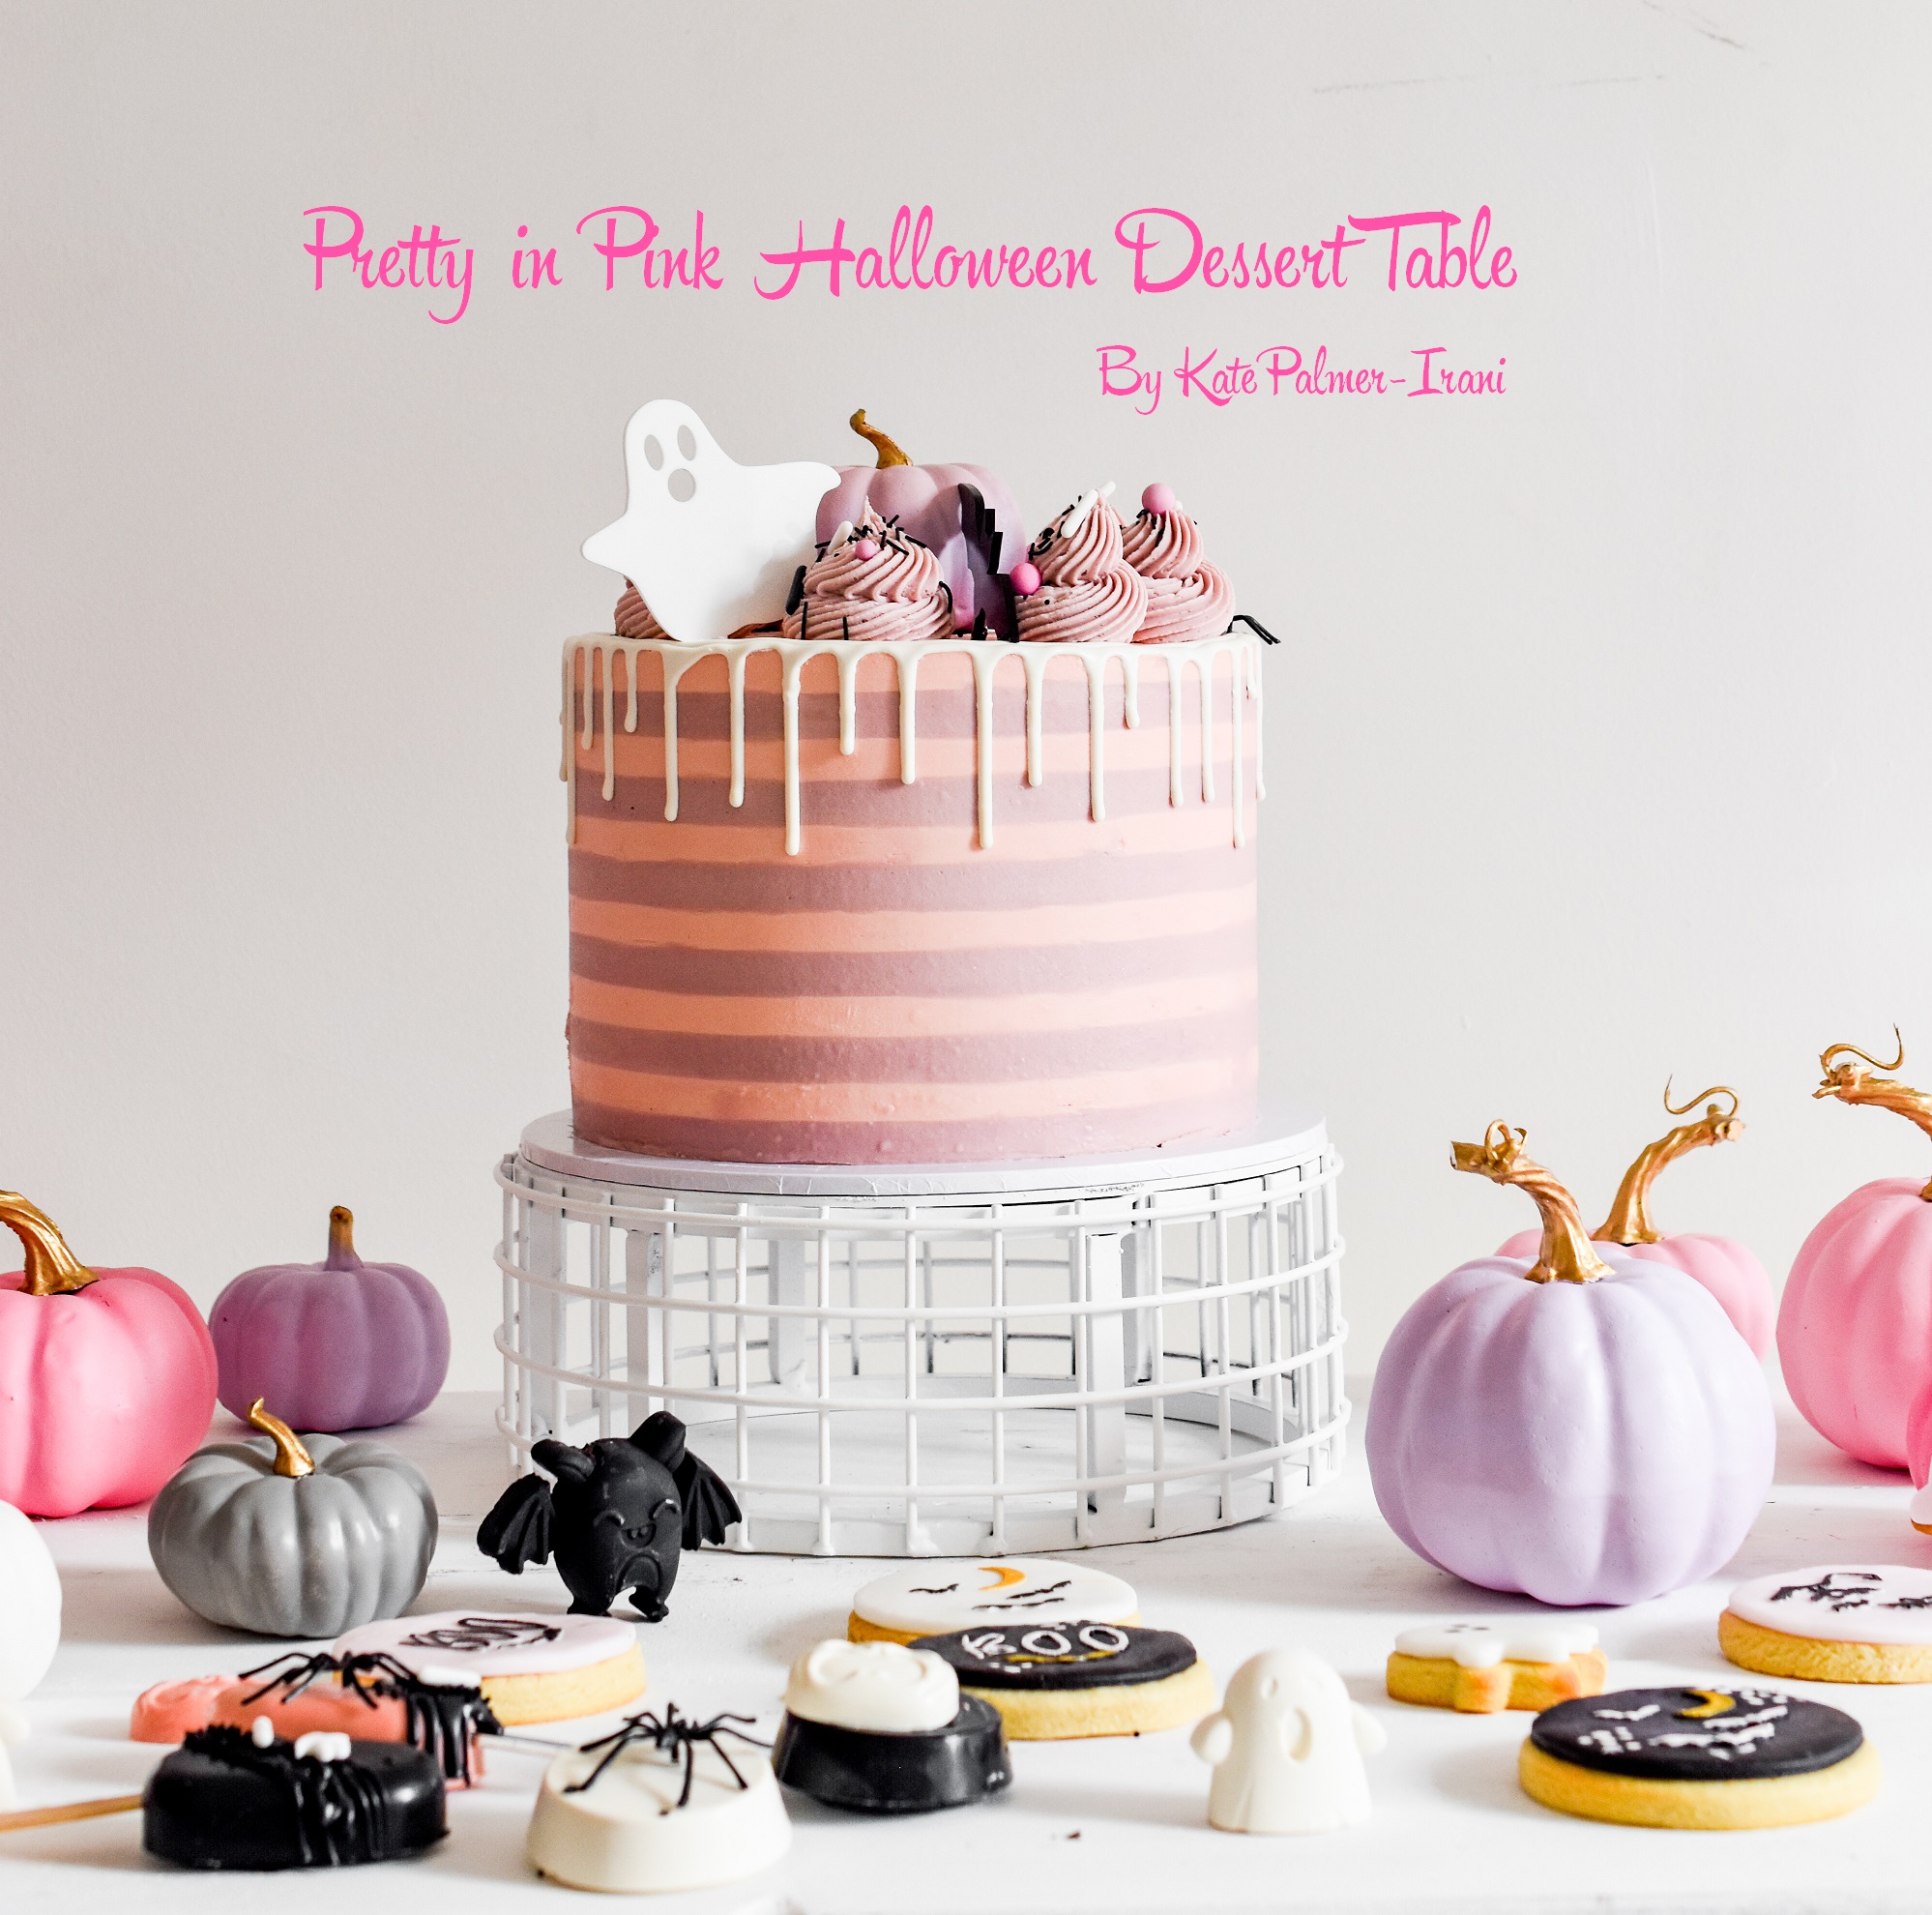 Pretty in Pink Halloween Dessert Table - American Cake Decorating